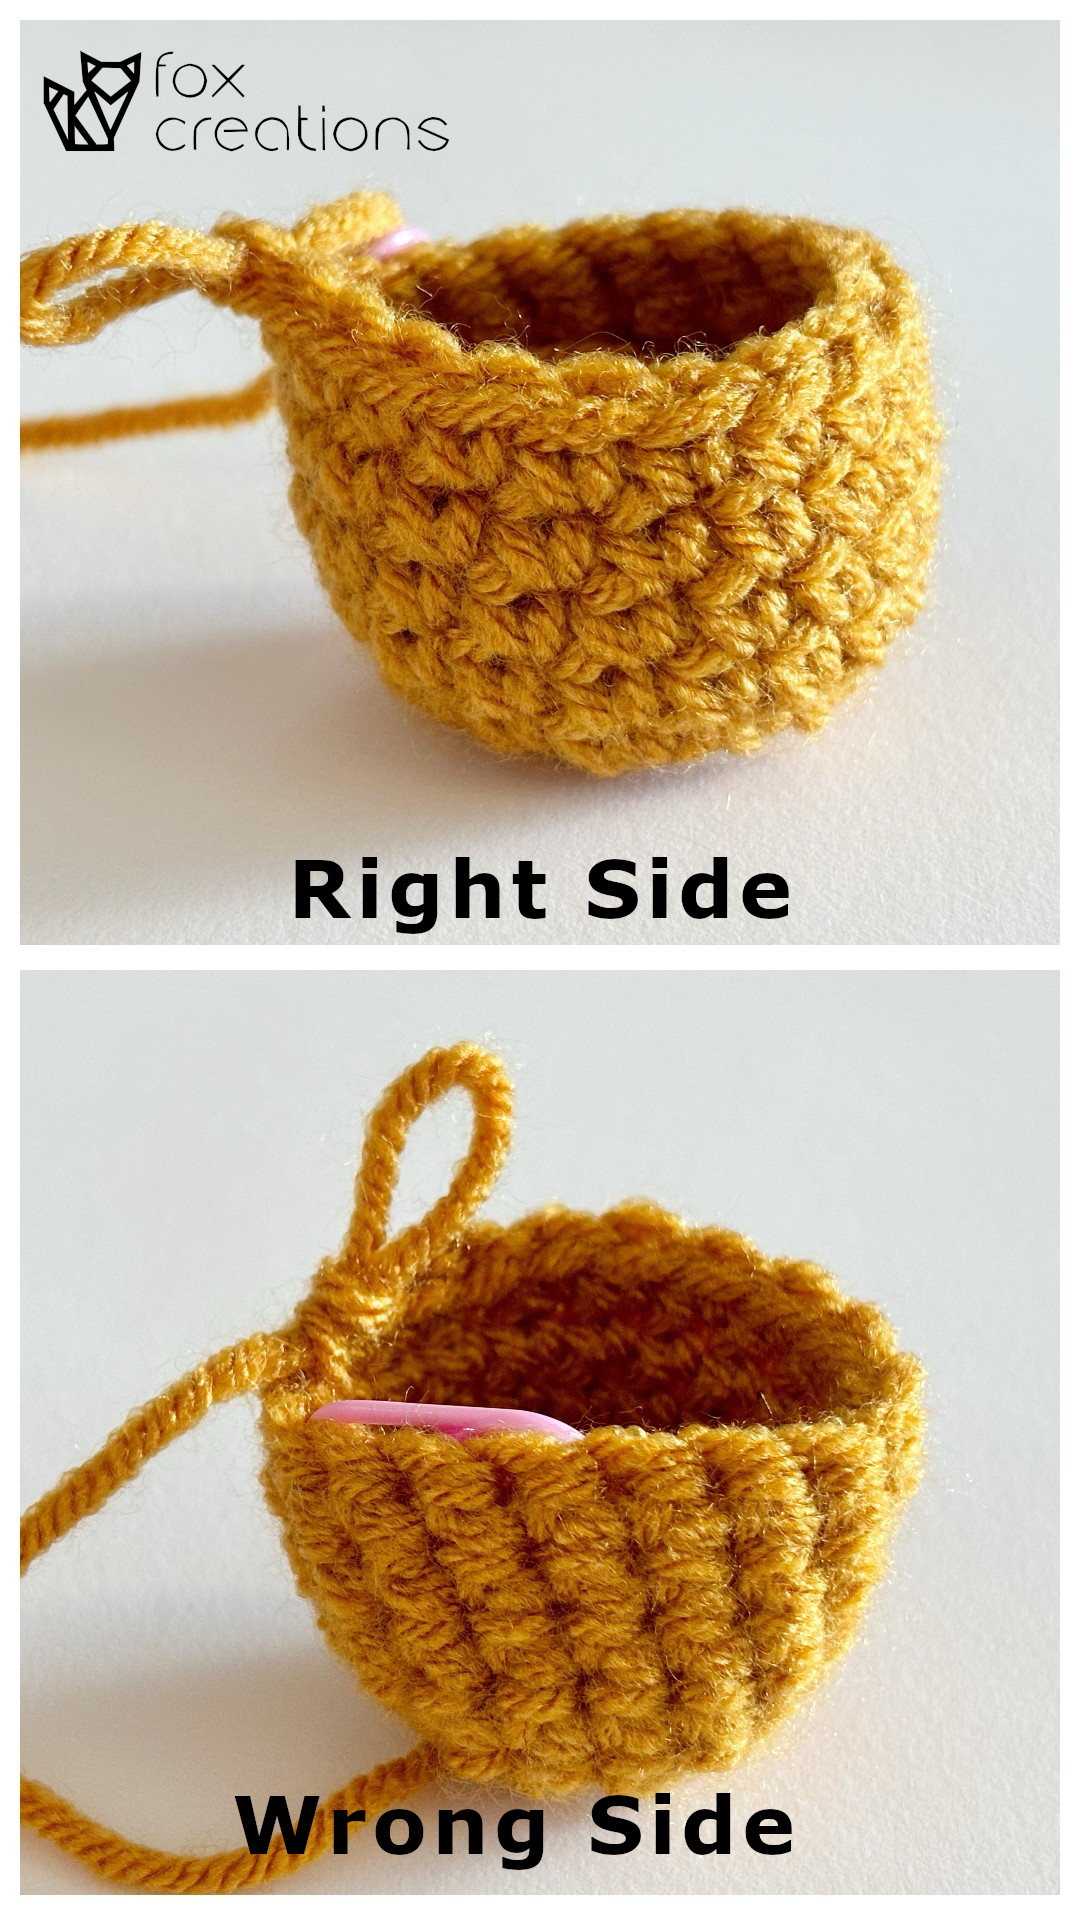 What is the right side of crochet amigurumi